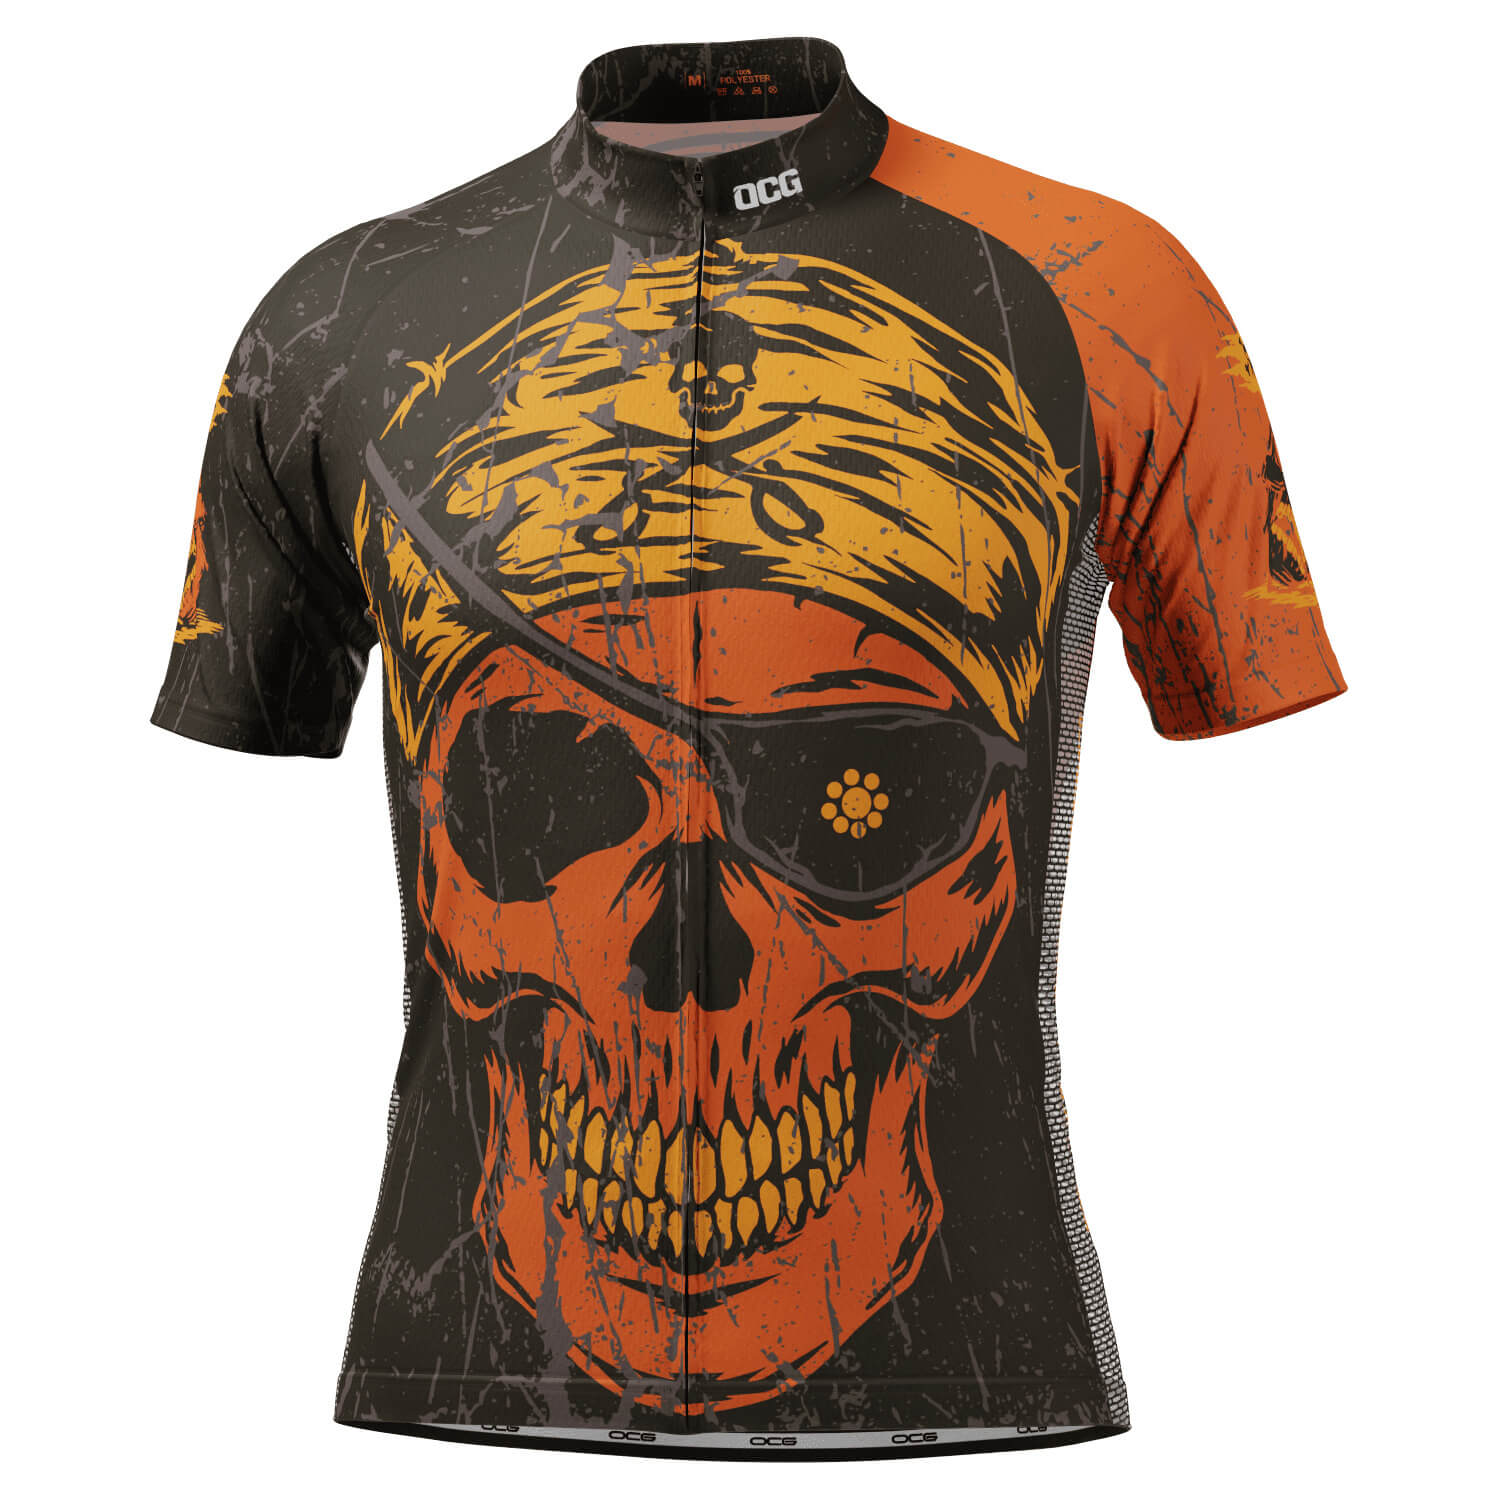 Men's One Eyed Willy Pirate Short Sleeve Cycling Jersey